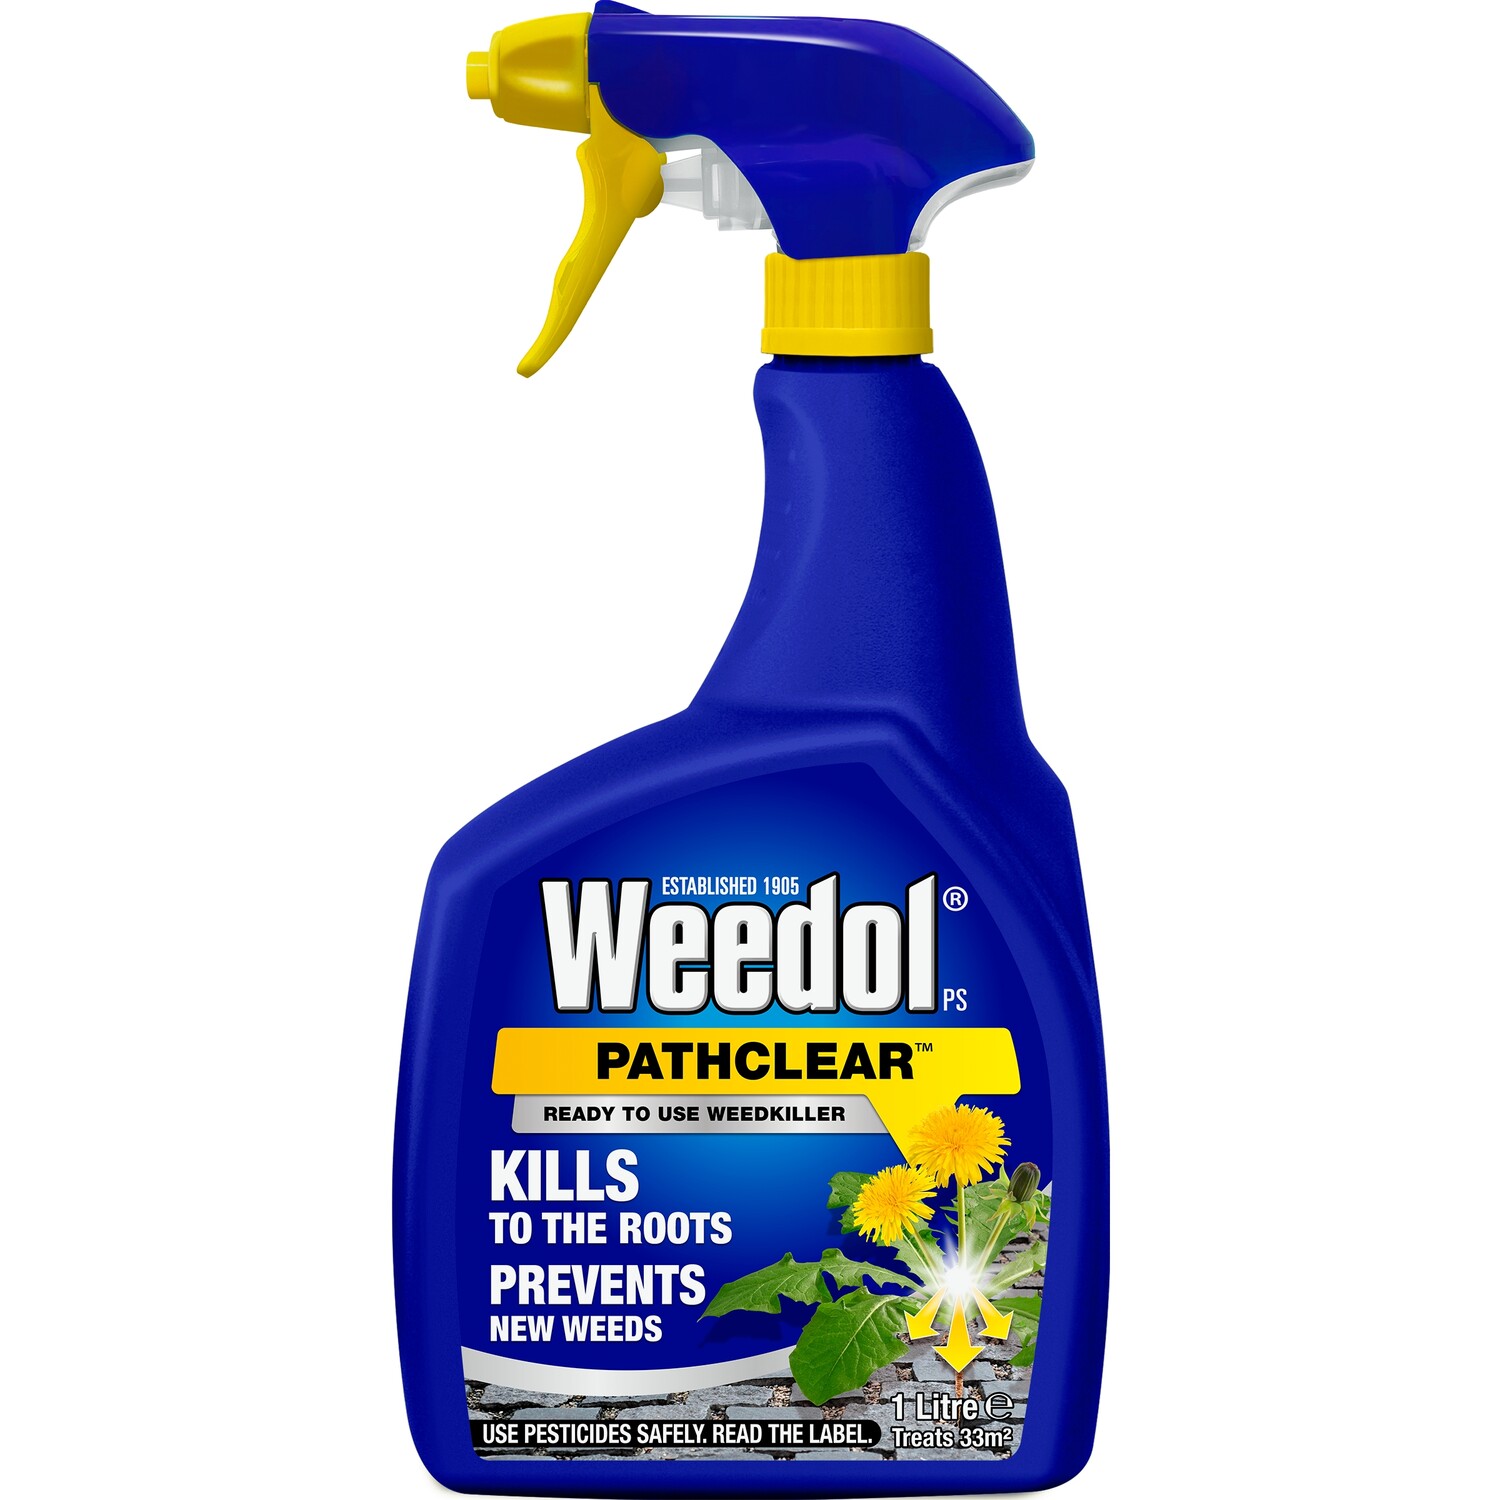 Pathclear Weed Killer Image